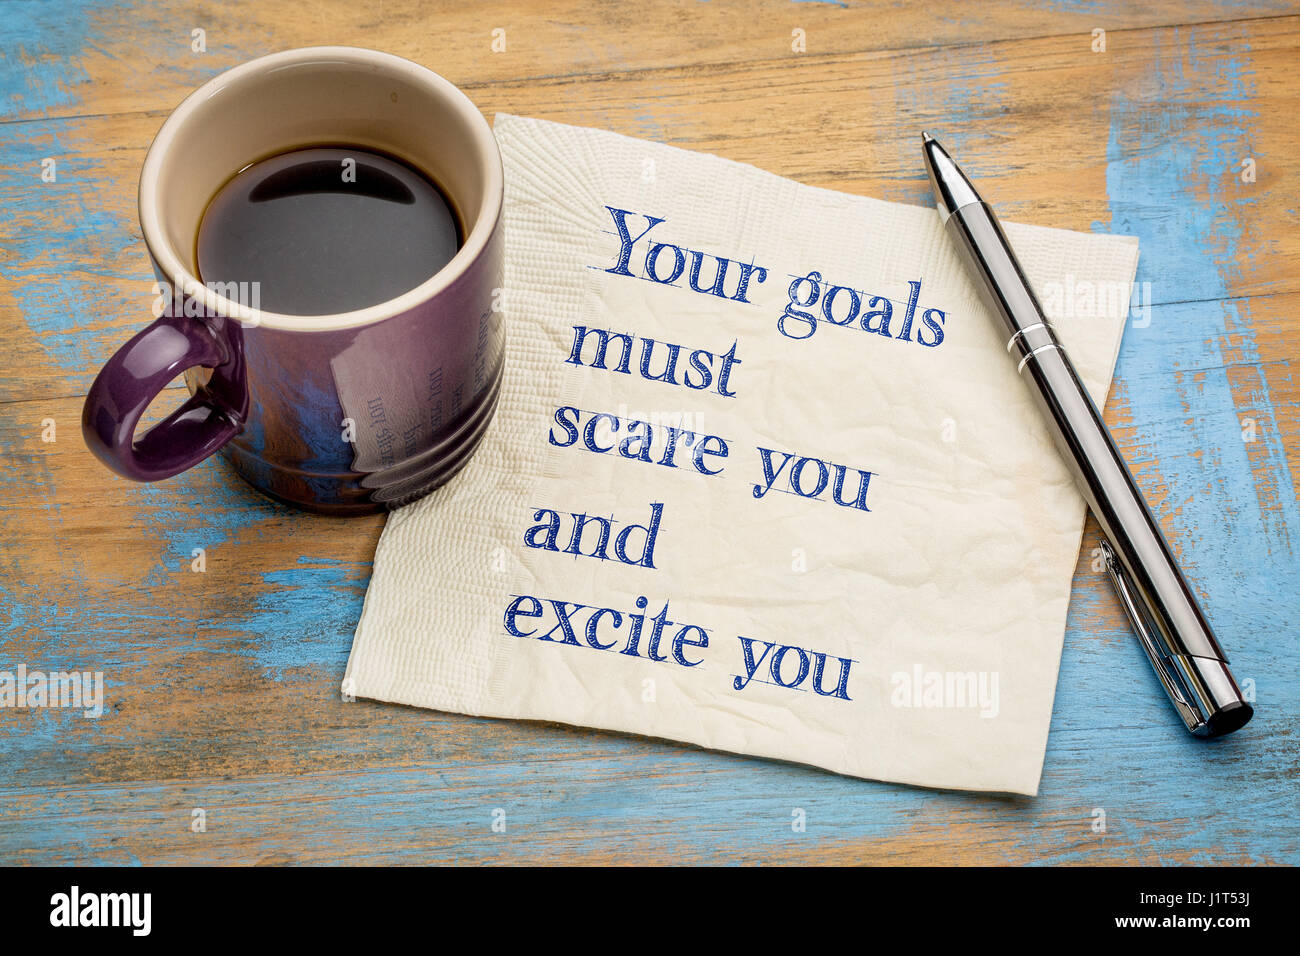 Your goals must scare and excite you - handwriting on a napkin with a cup of espresso coffee Stock Photo